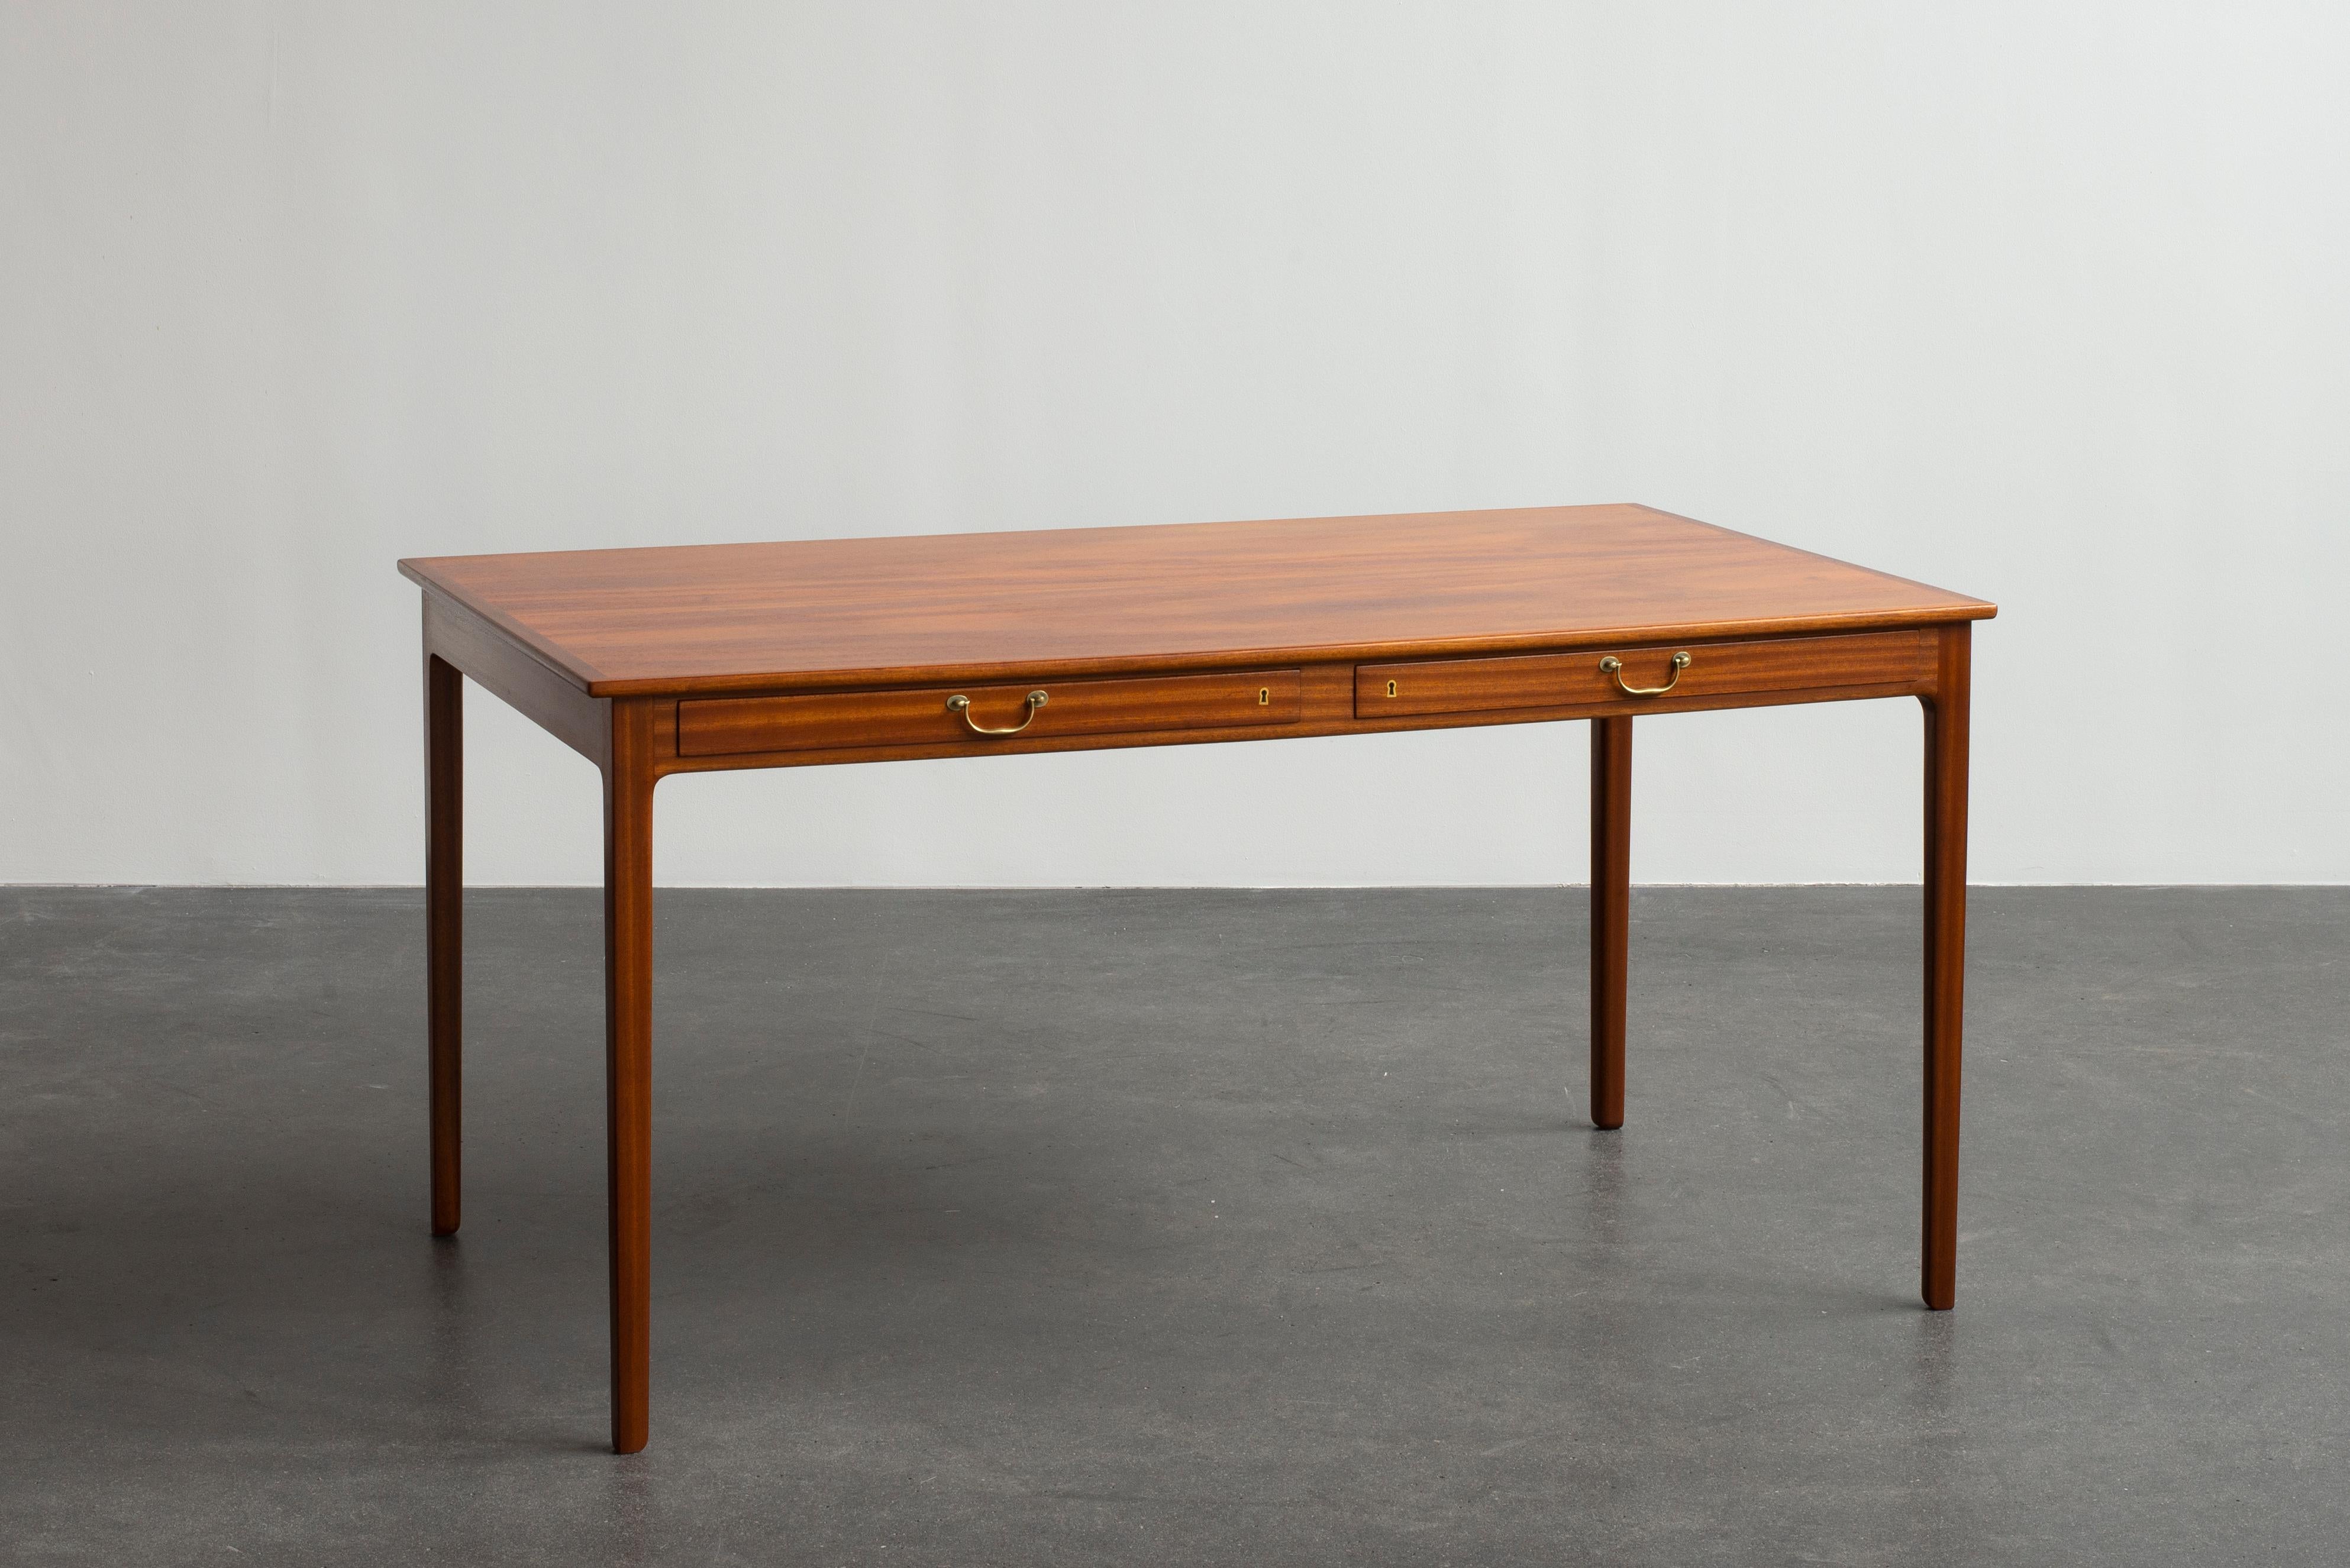 Ole Wanscher desk in mahogany with two drawers. Executed by A. J. Iversen, Copenhagen, Denmark.